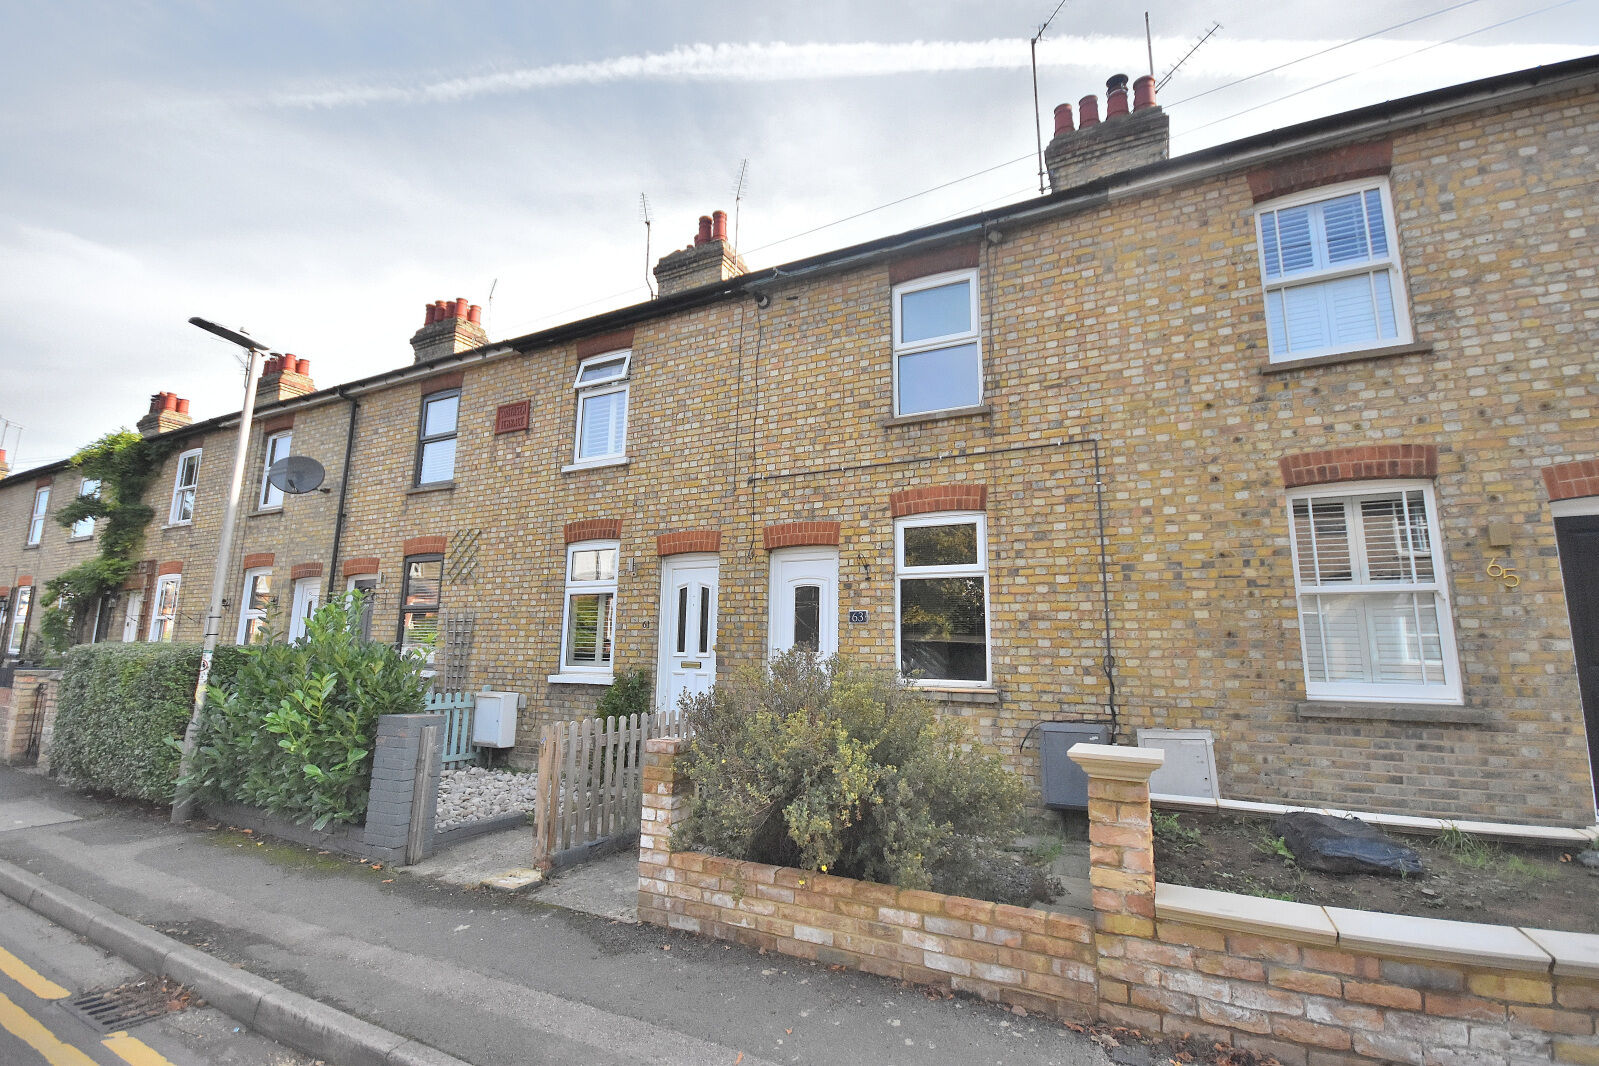 2 bedroom mid terraced house for sale Southmill Road, Bishop's Stortford, CM23, main image